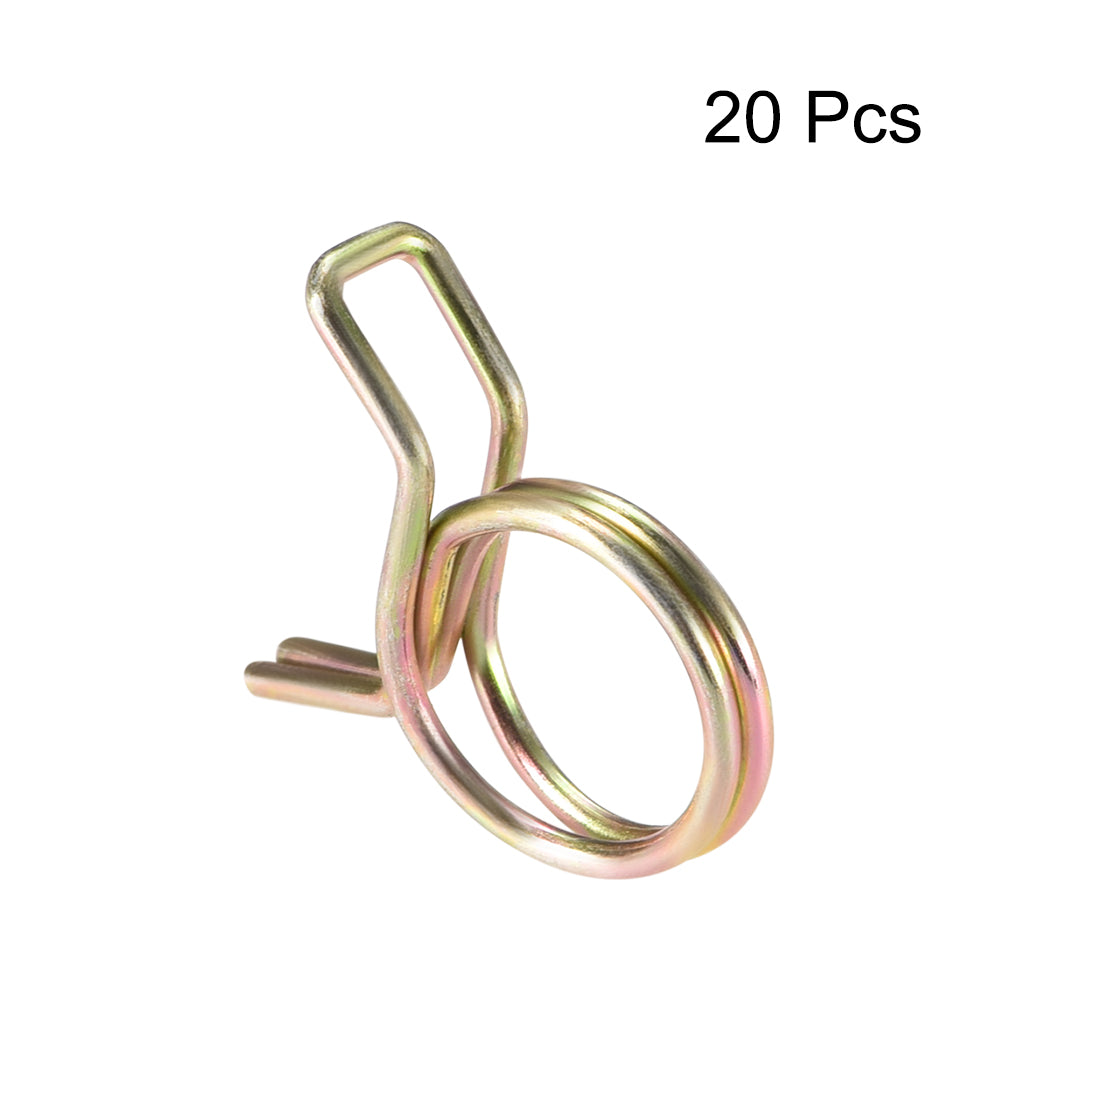 uxcell Uxcell Double Wire Spring Hose Clamp 12mm Fuel Line Tube Spring Clips Zinc Plated 20Pcs